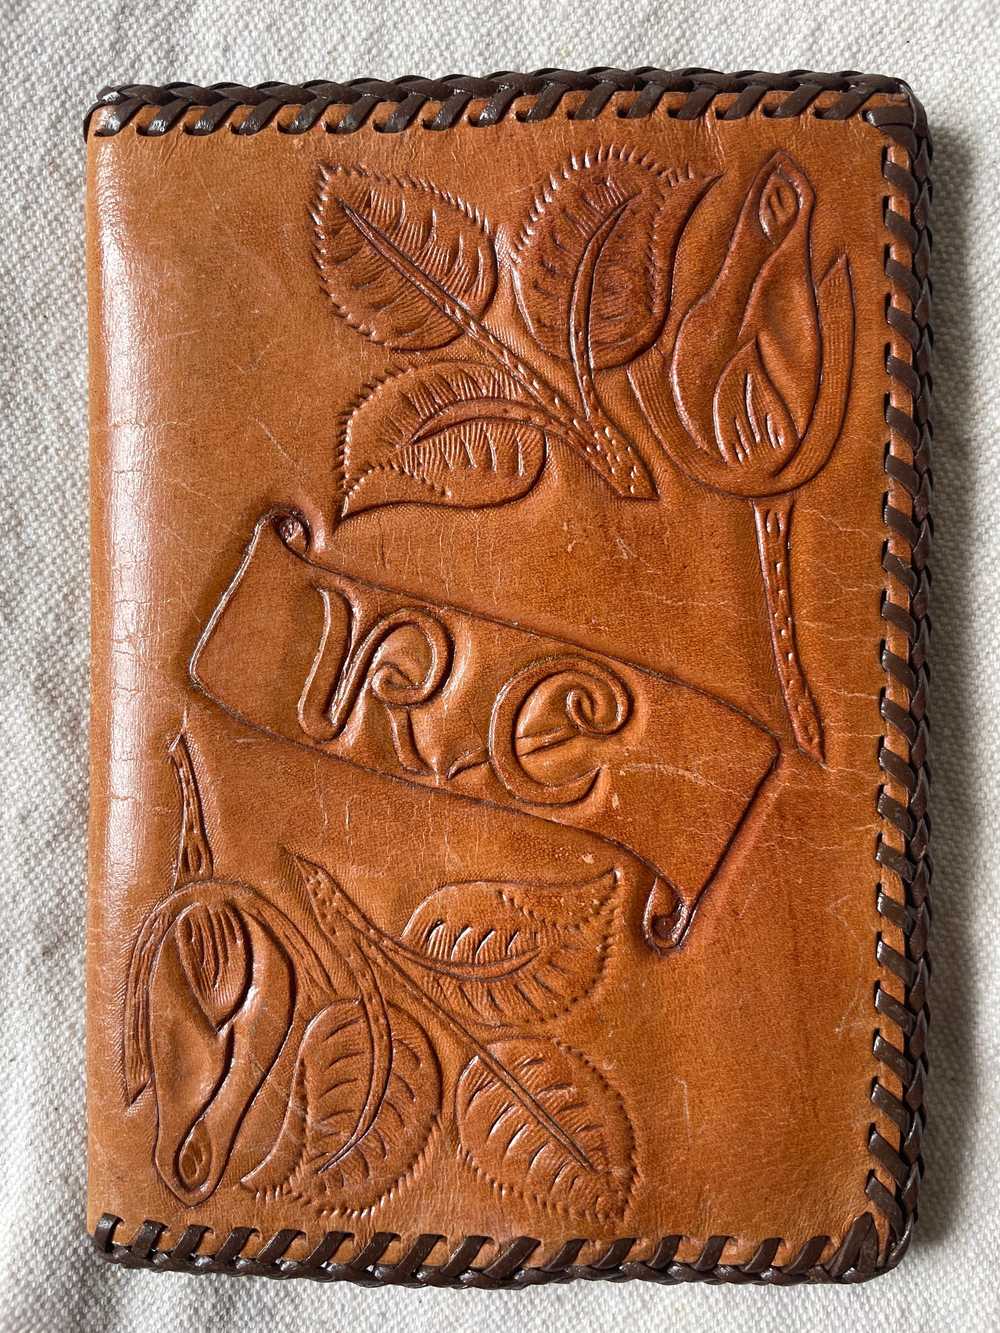 70s tooled leather wallet / 1970s leather bifold … - image 3